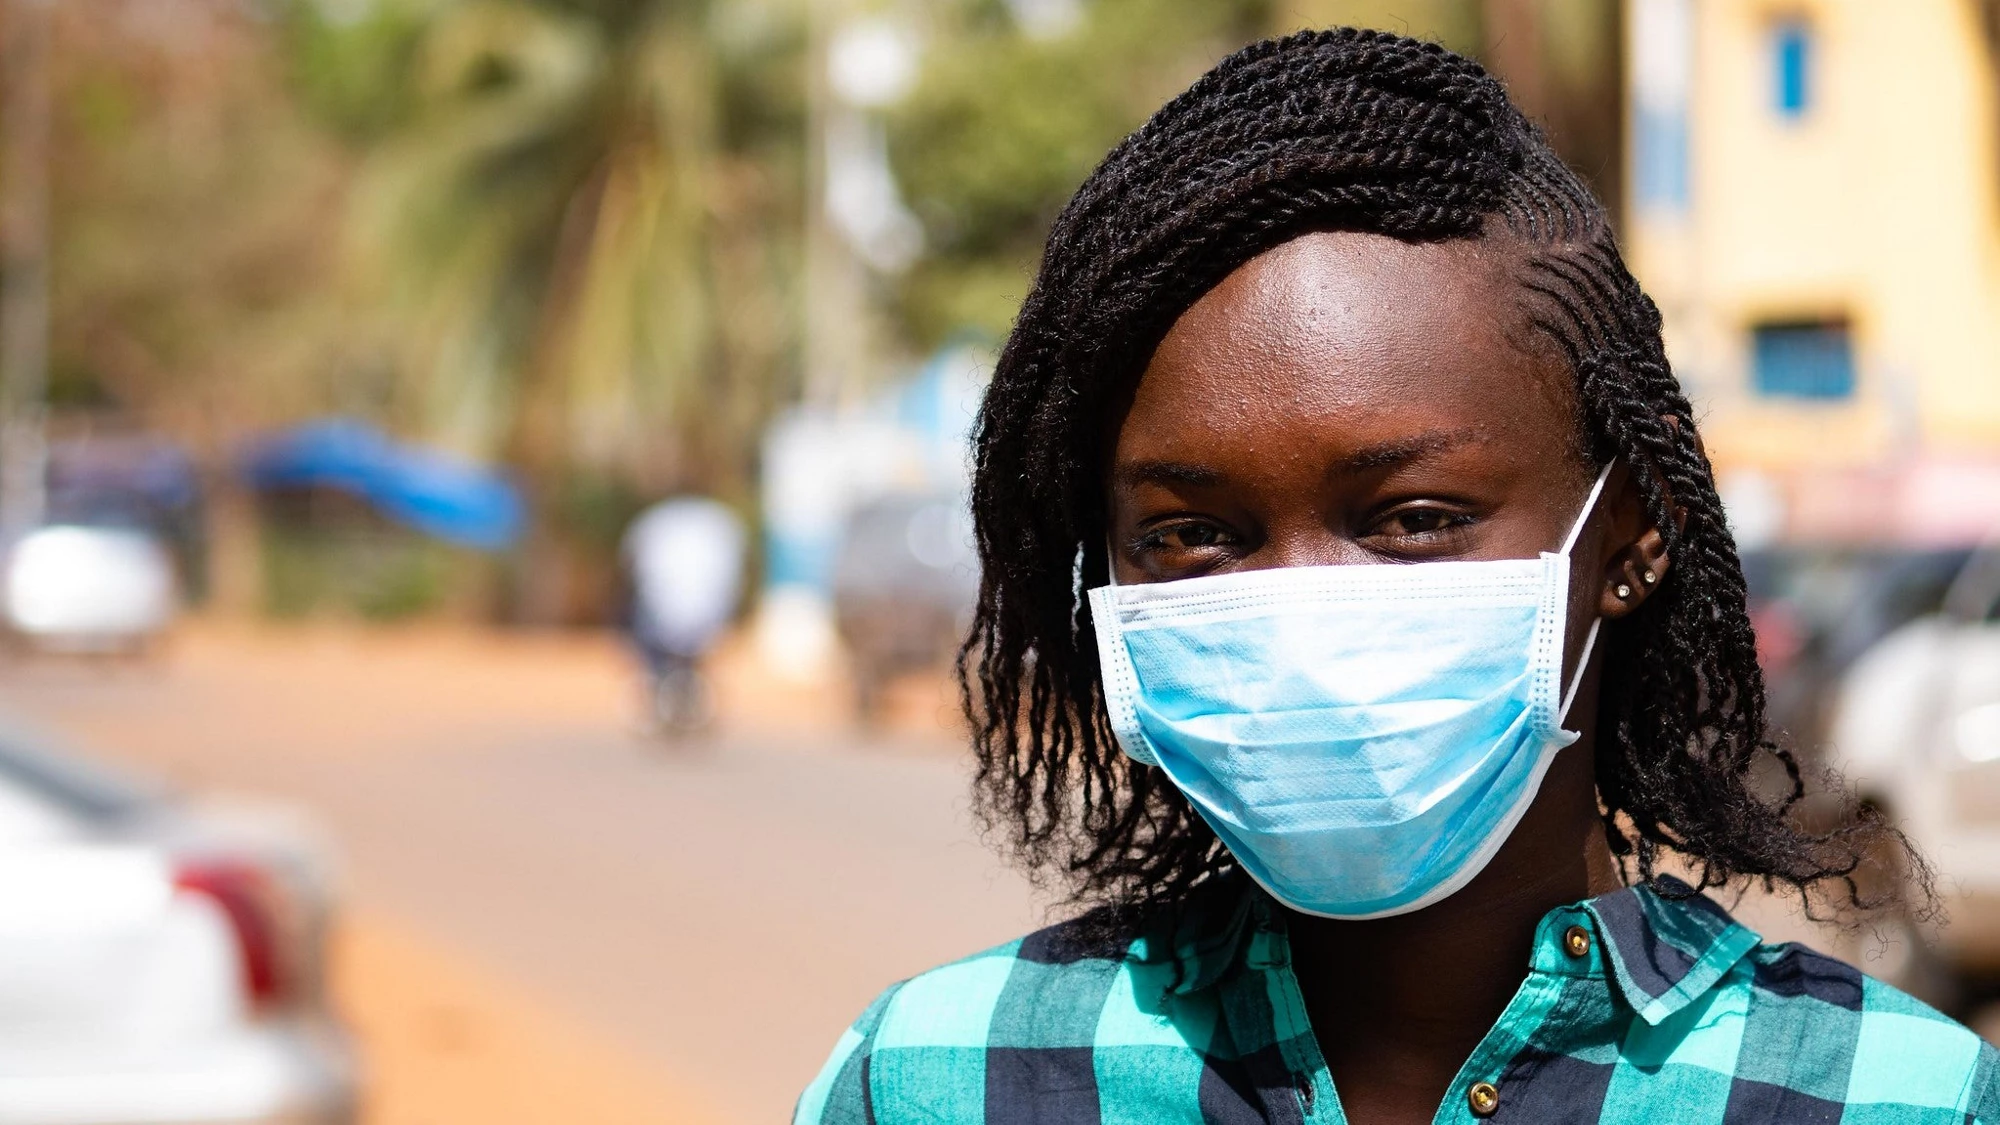 Woman in Mali wears a protective mask covering her nose and mouth